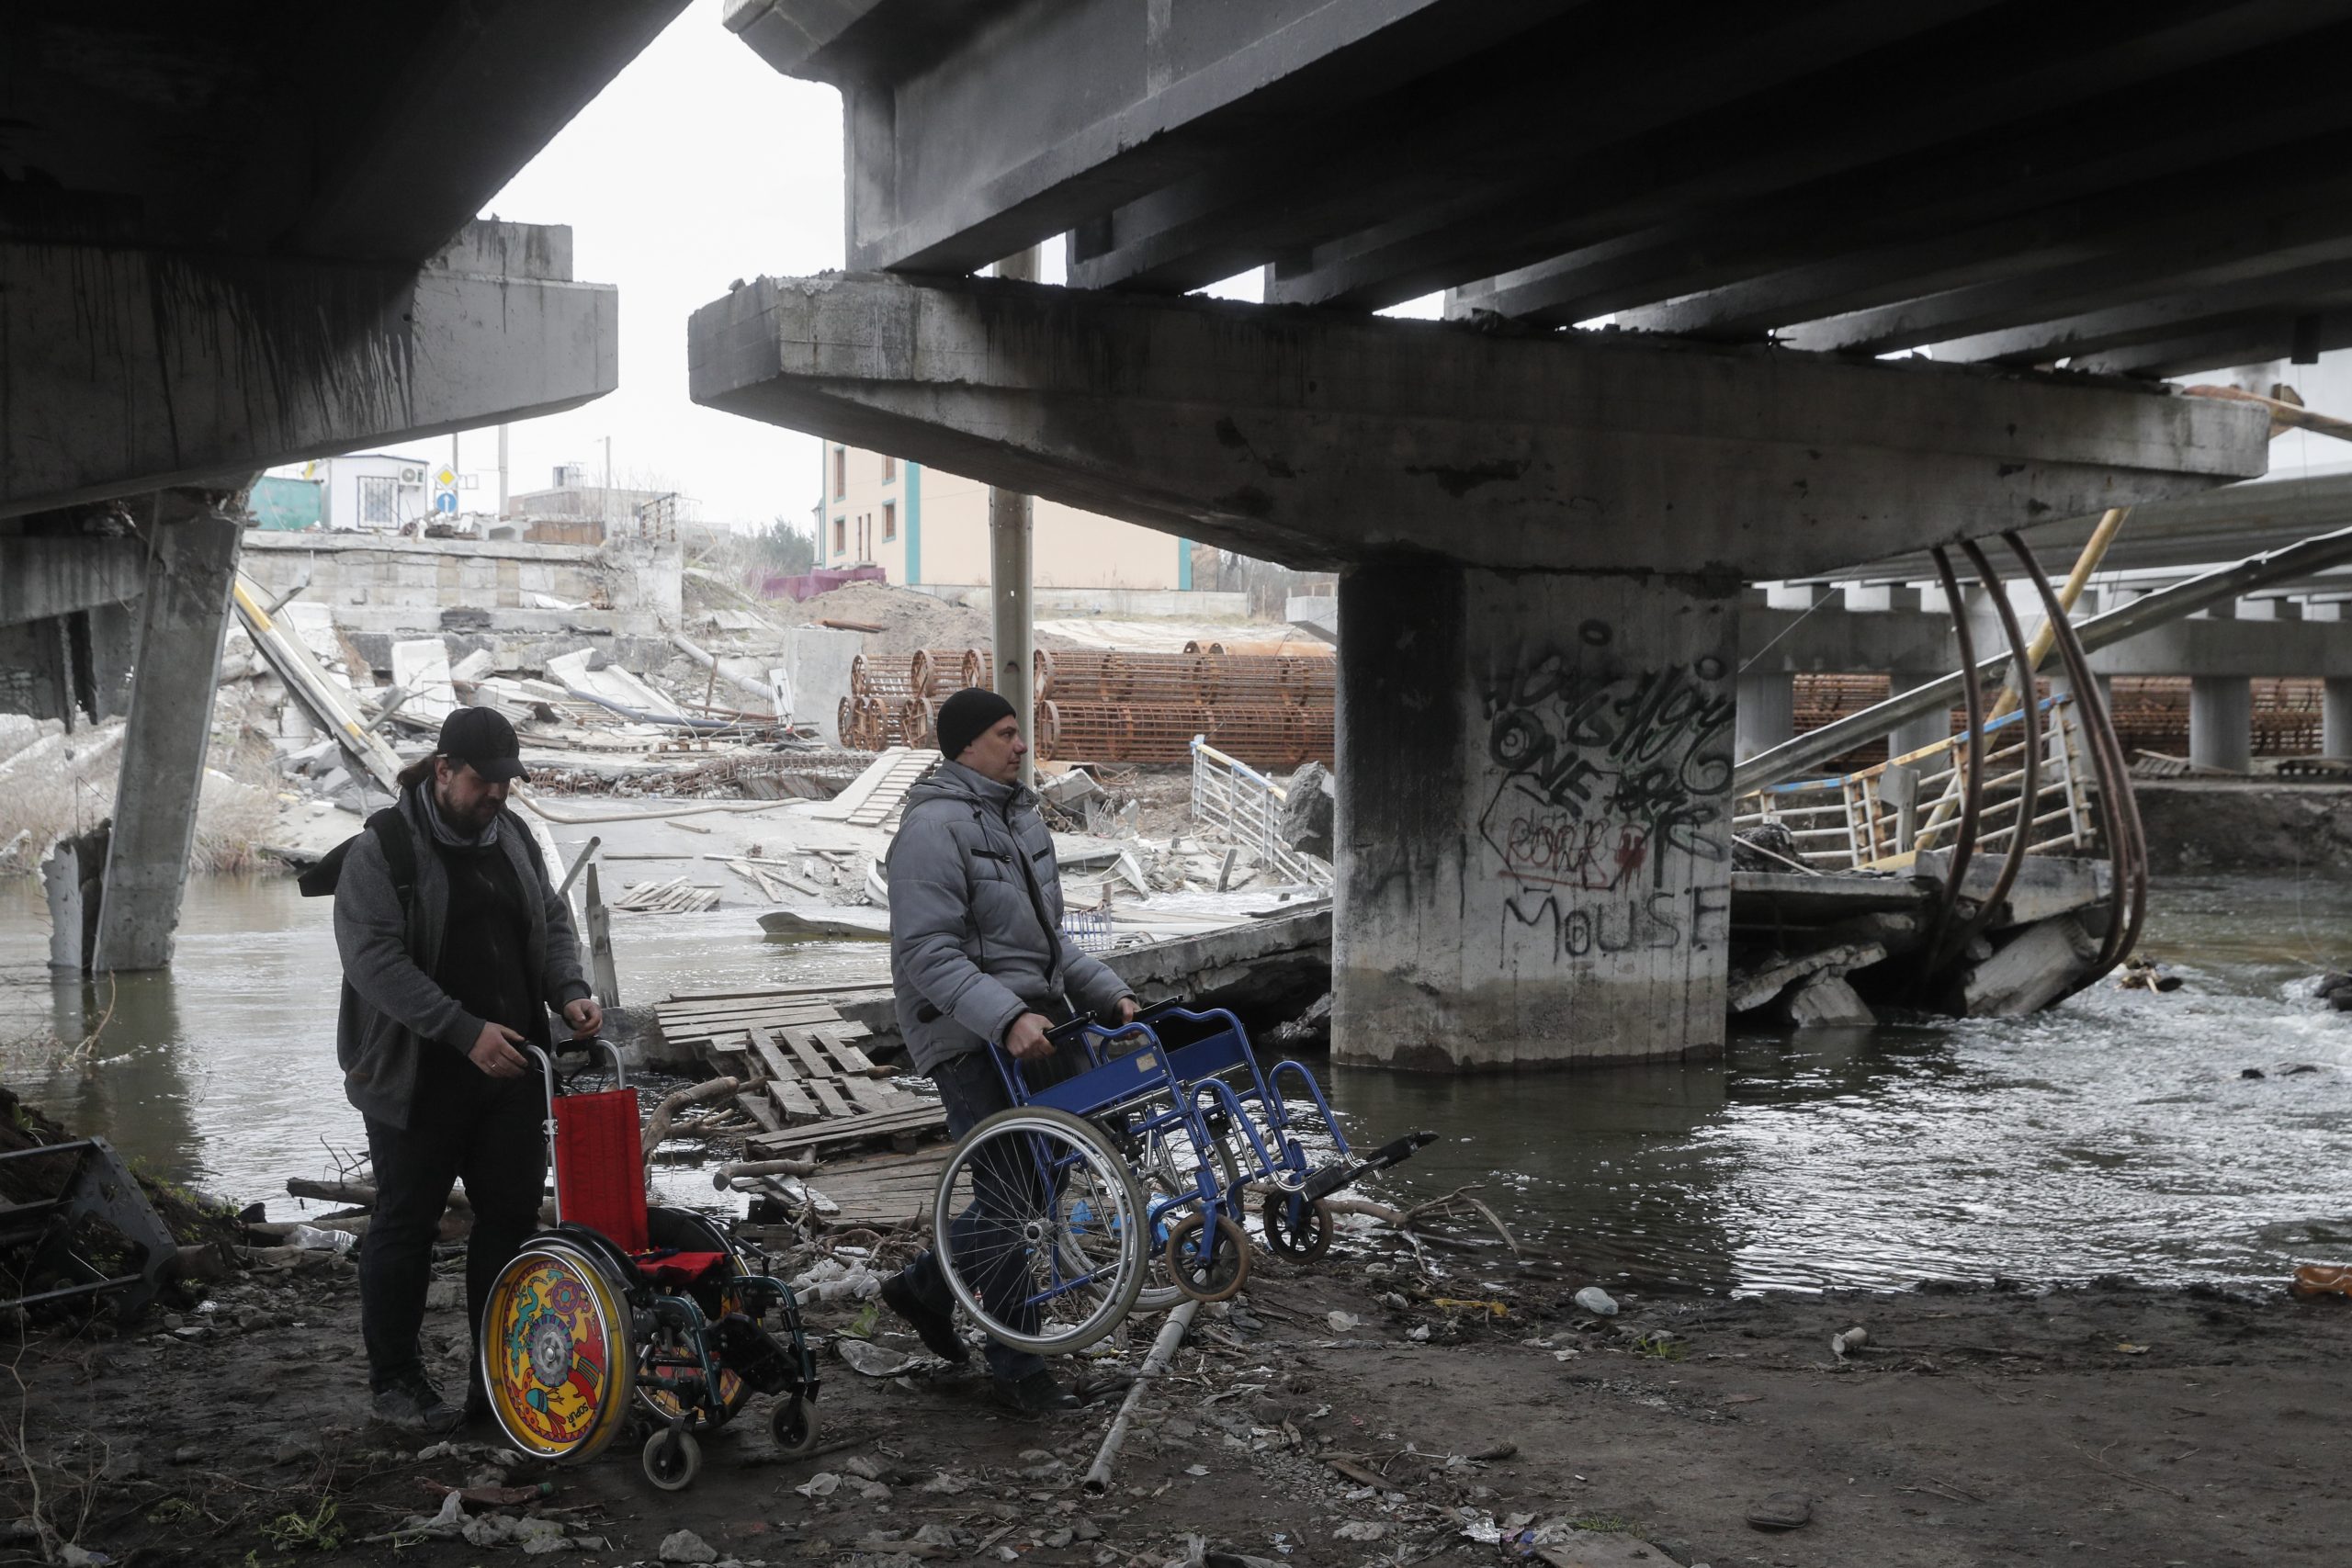 epa10552576 Men carry wheelchairs  under the destroyed Romanov bridge between Irpin and Kyiv, Ukraine, 31 March 2023. The Romanov Bridge is the place where the evacuation of residents from Irpin and other occupied territories took place during Russian troops attacks on Kyiv. Russian troops on 24 February 2022 entered Ukrainian territory, starting a conflict that has provoked destruction and a humanitarian crisis.  EPA/SERGEY DOLZHENKO